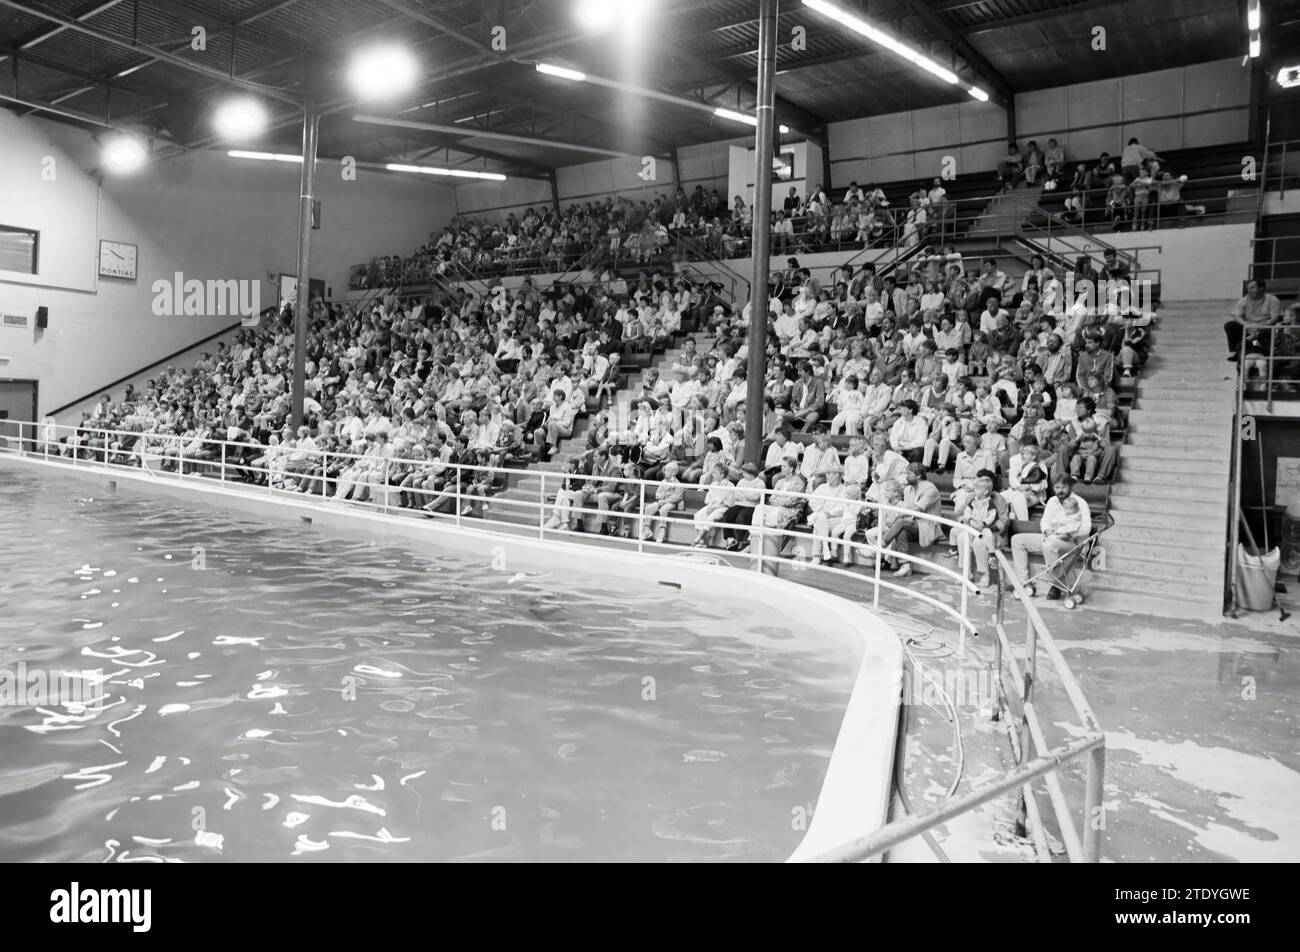 Zandvoort, audience and son of Slotemaker on dolphin, Dolfinarium, 31-07-1985, Whizgle News from the Past, Tailored for the Future. Explore historical narratives, Dutch The Netherlands agency image with a modern perspective, bridging the gap between yesterday's events and tomorrow's insights. A timeless journey shaping the stories that shape our future. Stock Photo